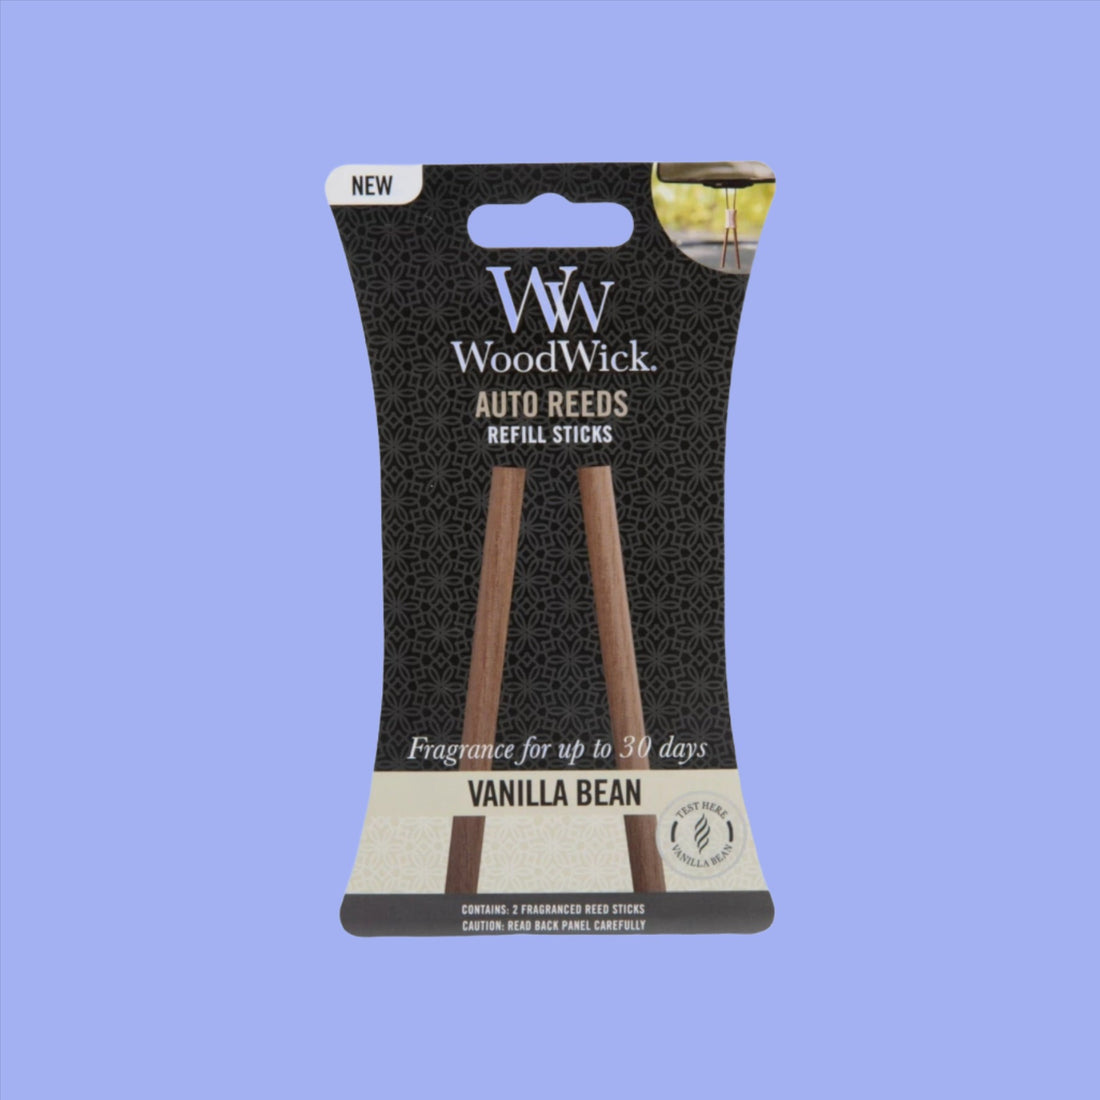 Woodwick Auto Reed Refill